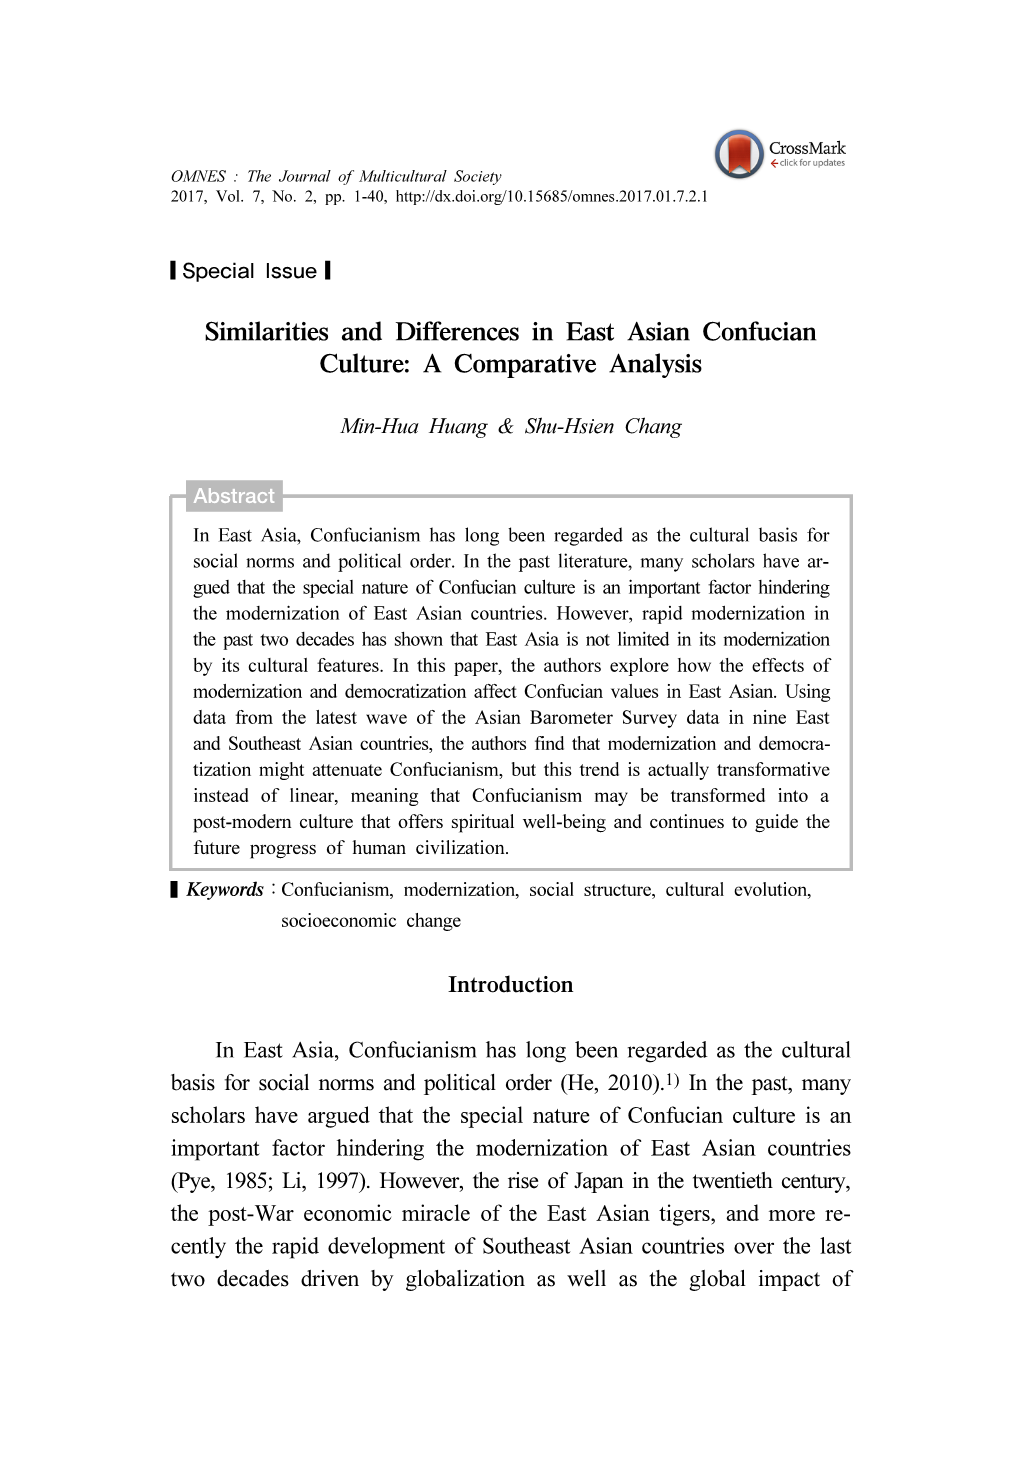 Similarities and Differences in East Asian Confucian Culture: a Comparative Analysis